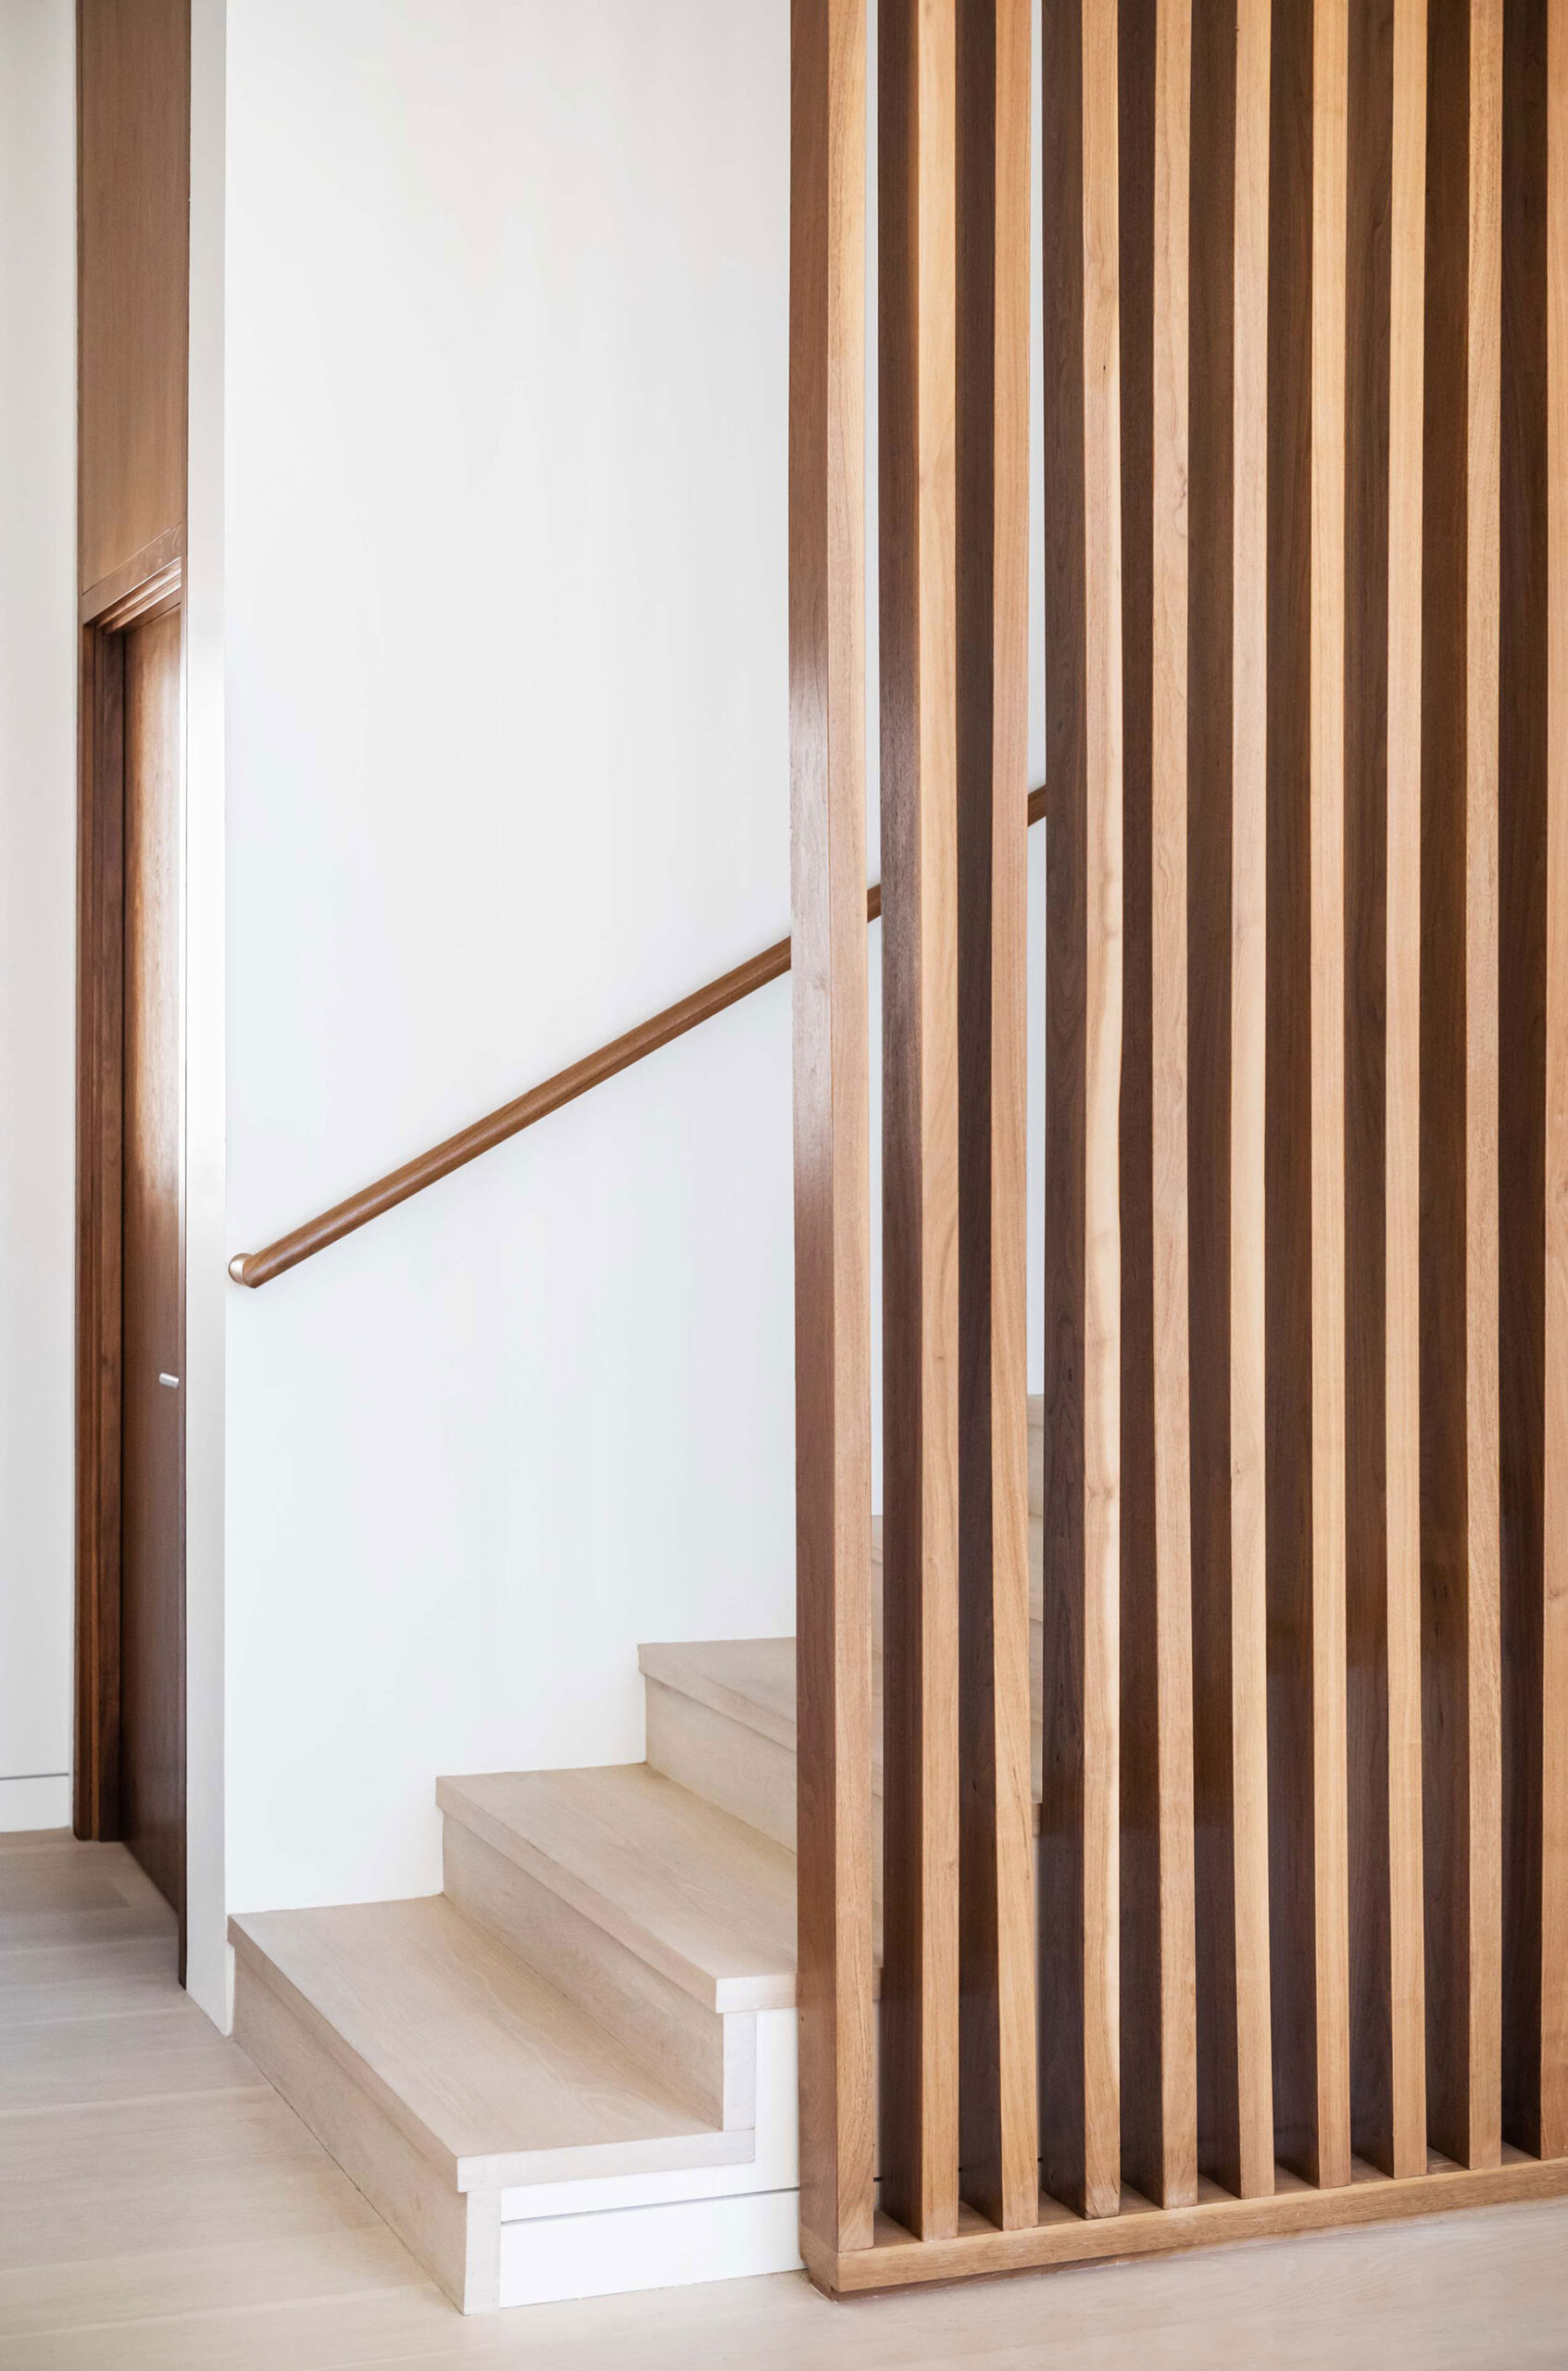 Detail of the stair and screen. Photo: © Paul Vu, Here and Now Agency